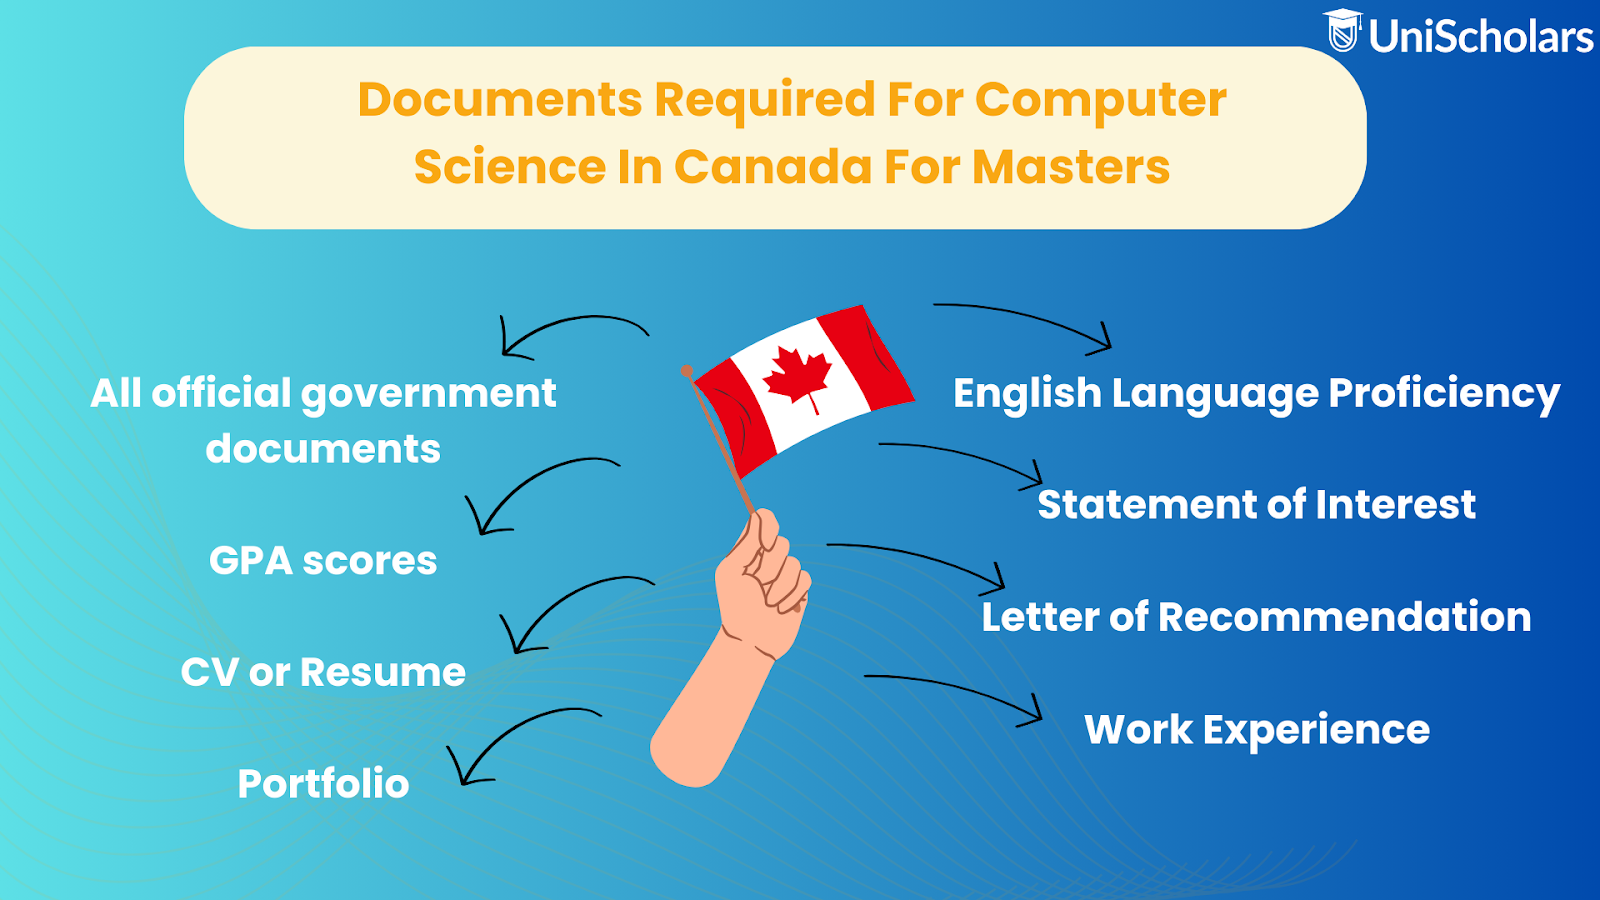 Documents Required For Computer Science Universities In Canada For Masters